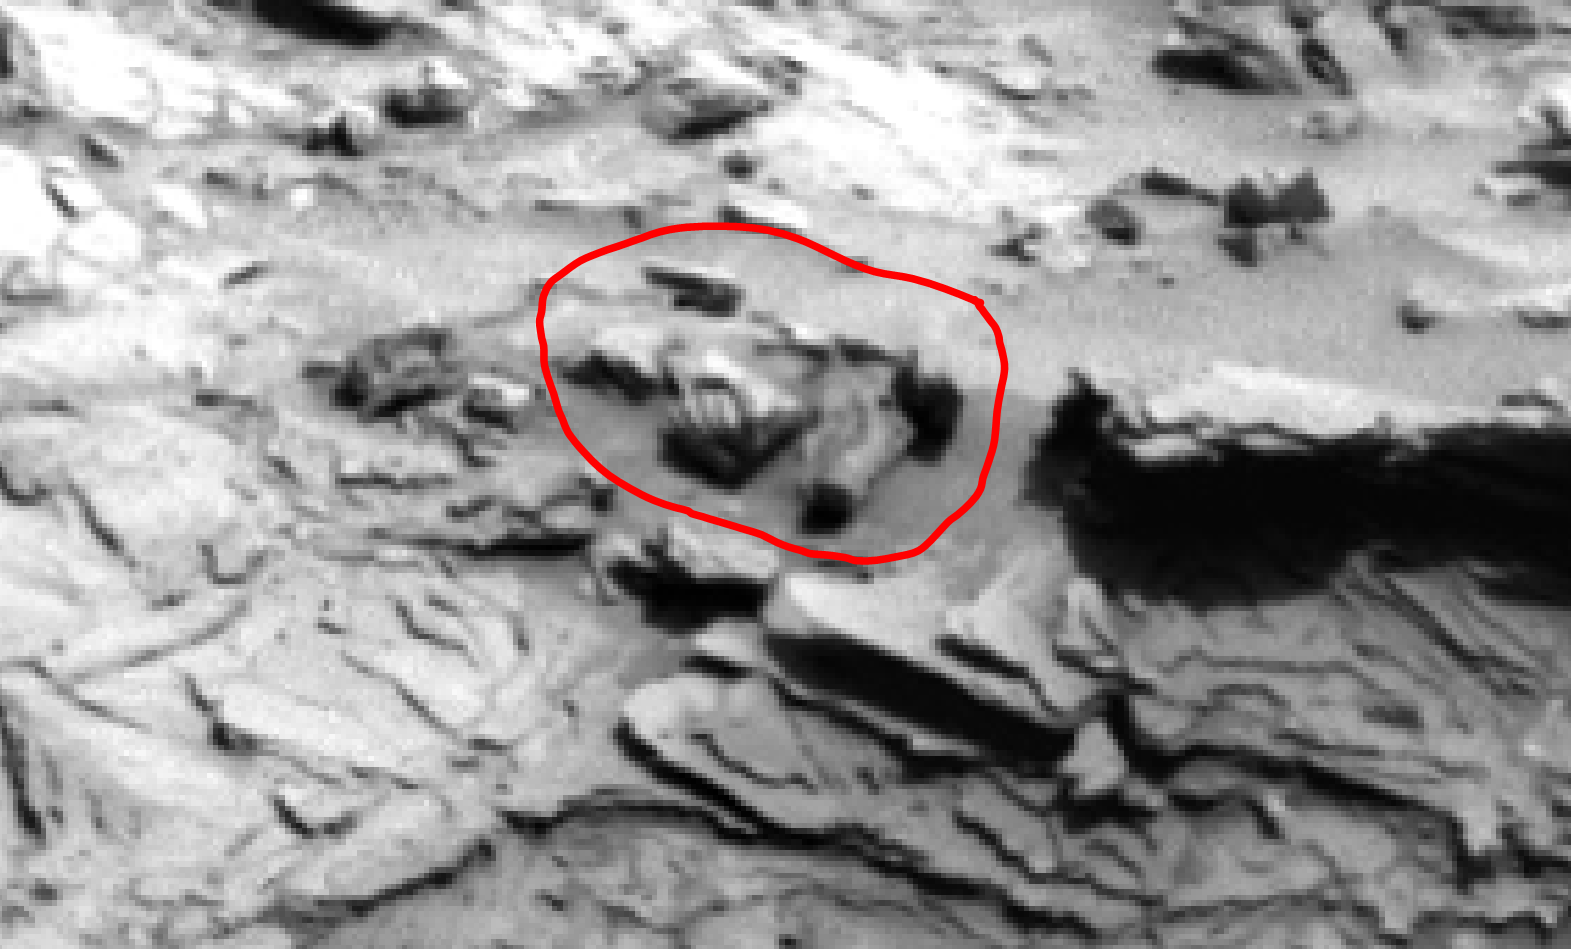 mars sol 1342 anomaly-artifacts 2a was life on mars